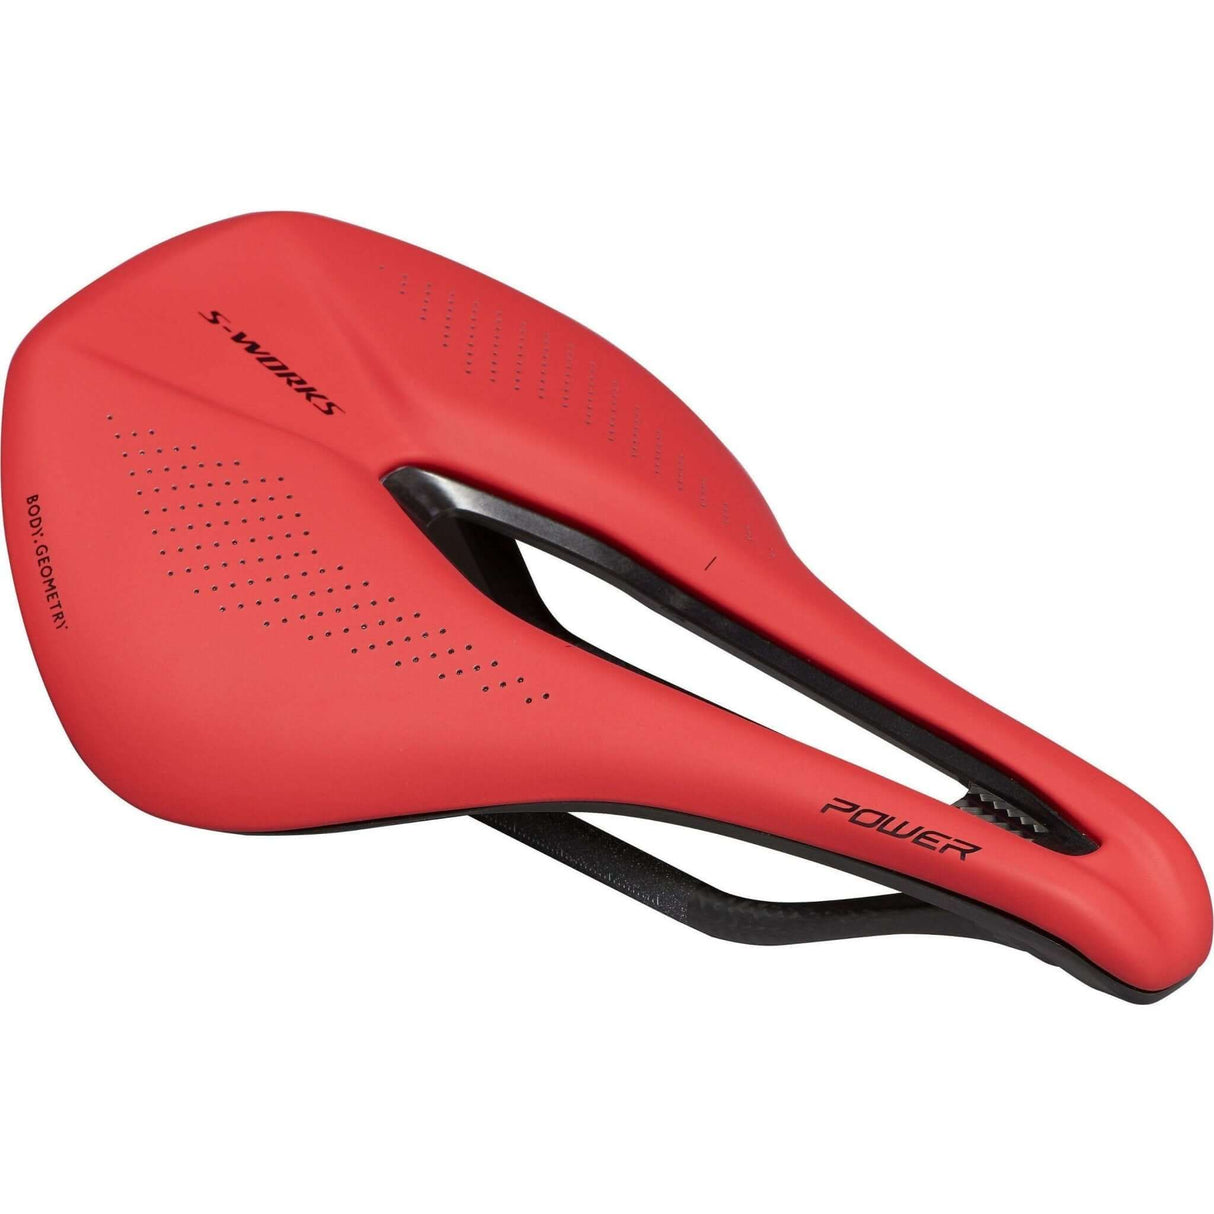 Specialized S-Works Power Saddle | Strictly Bicycles